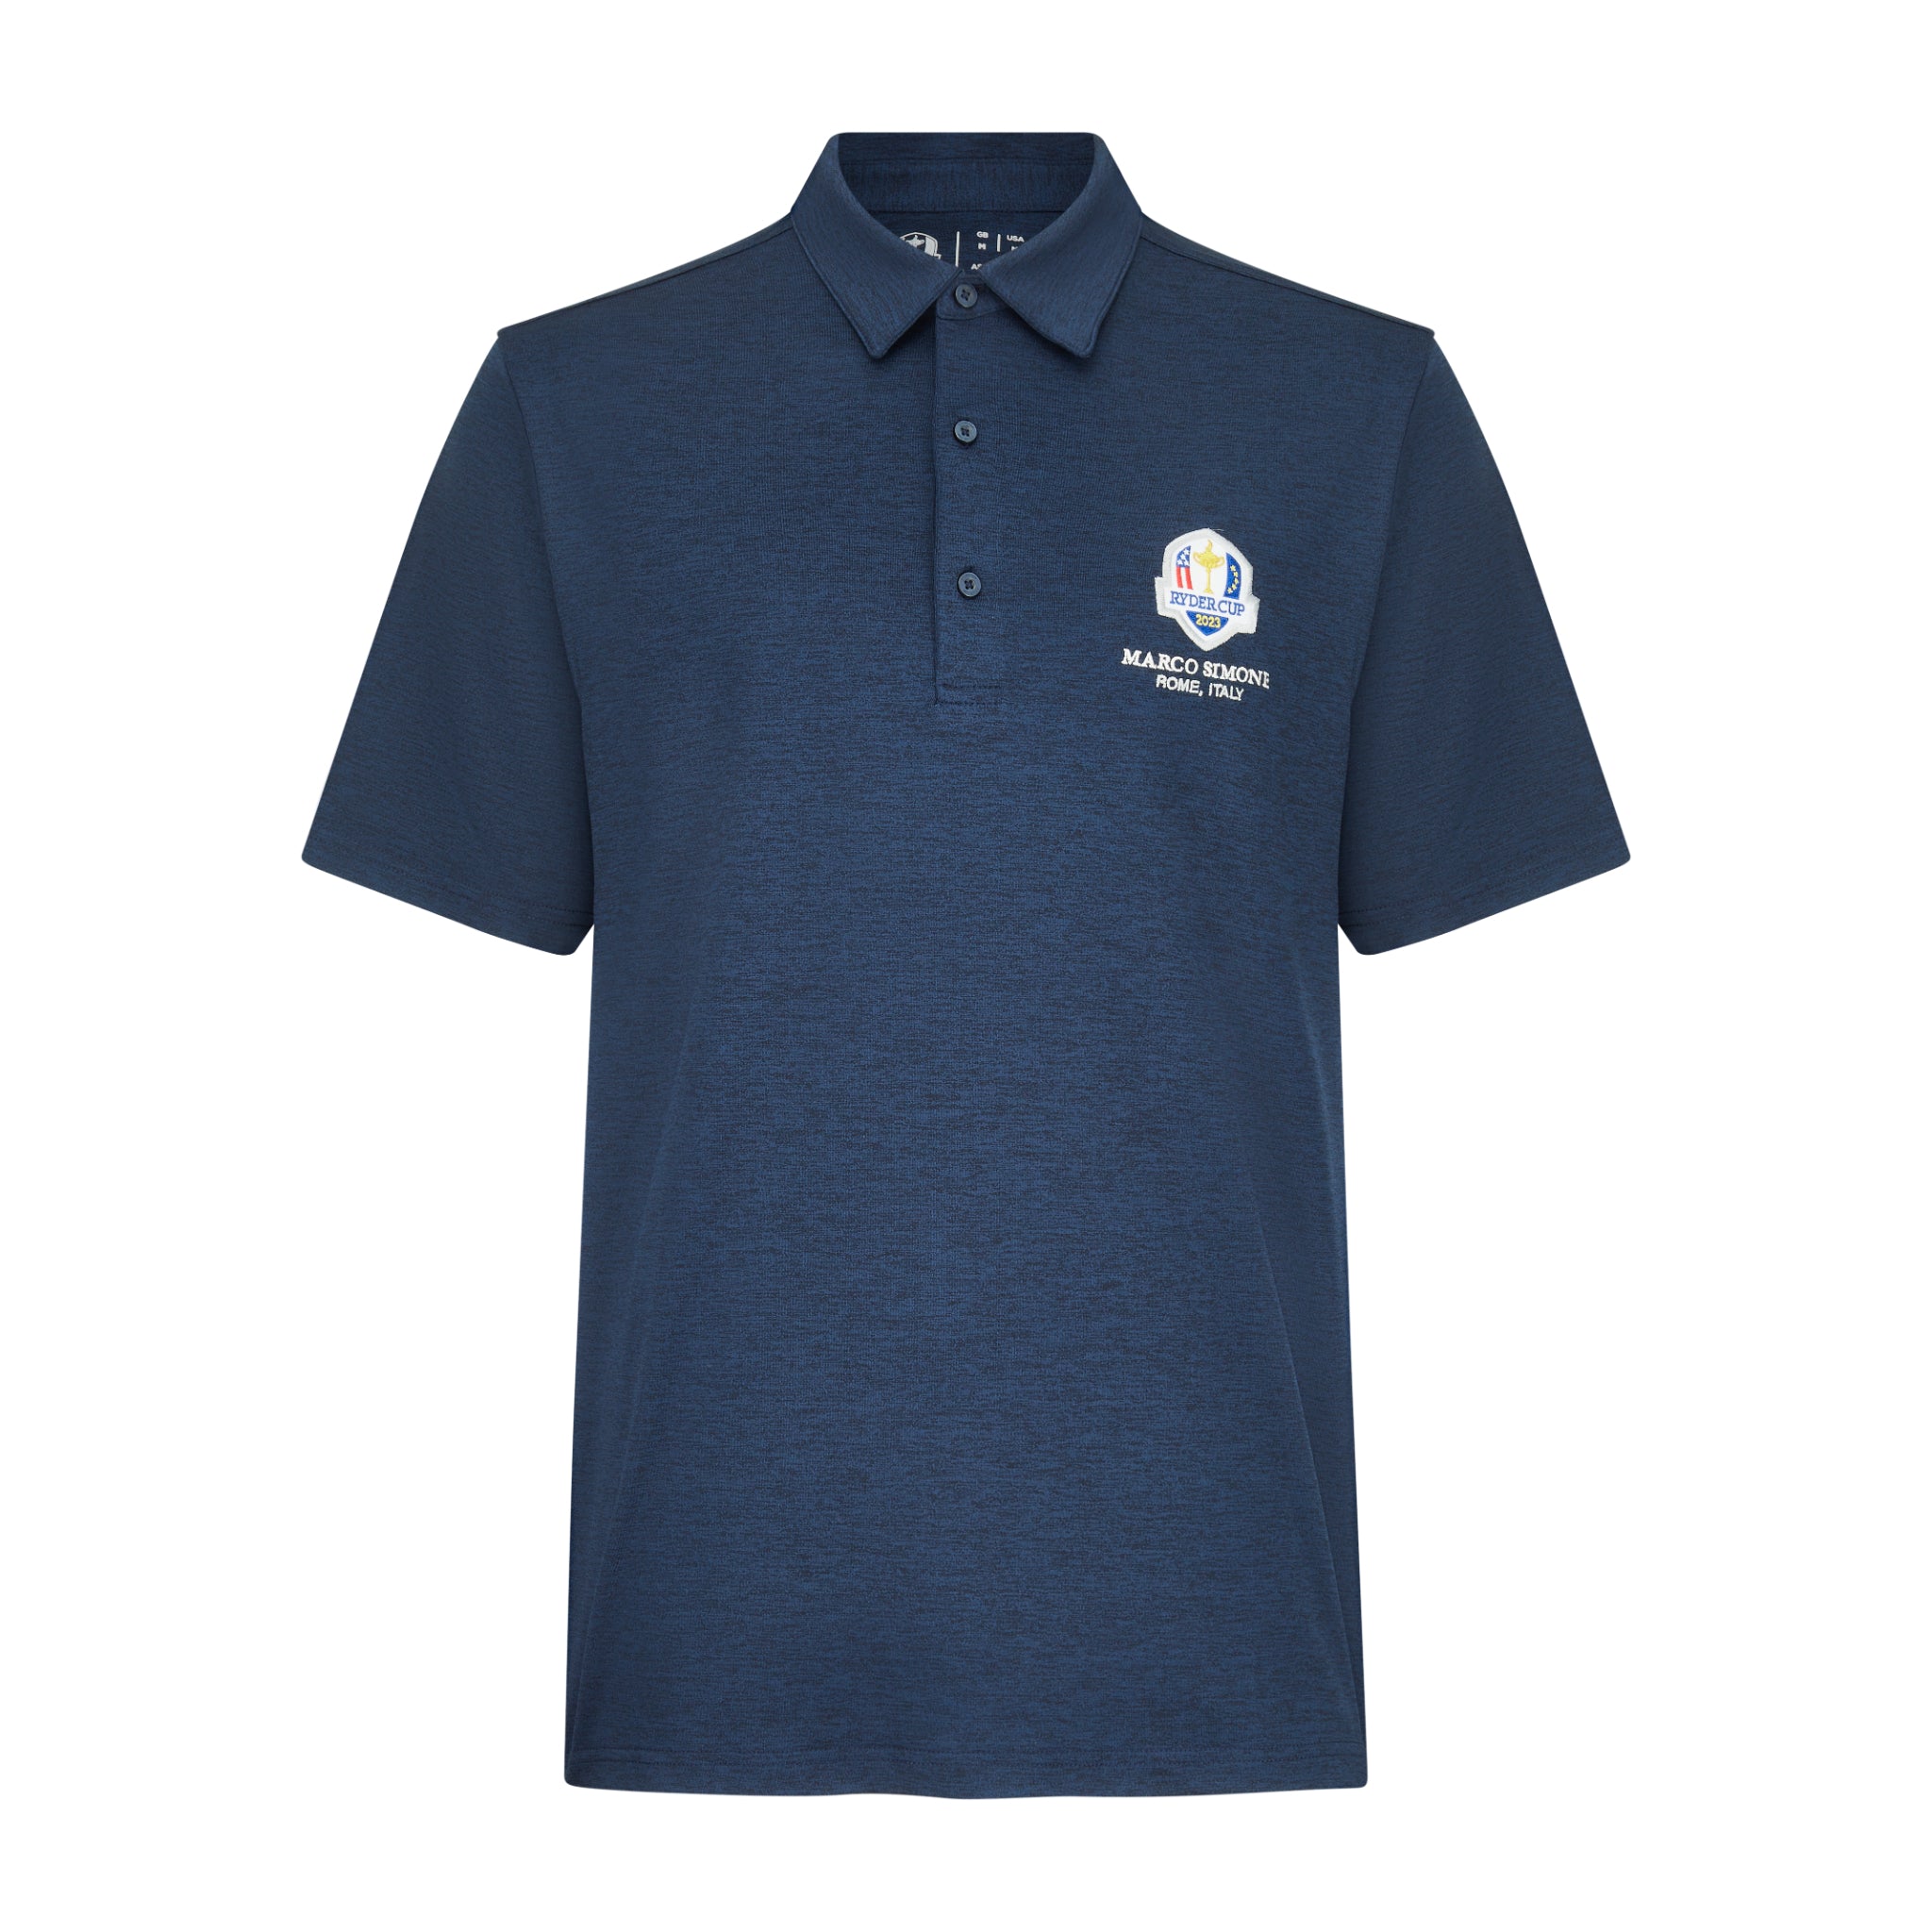 2023 Ryder Cup Men's Navy Marl Polo - The Official European Ryder Cup Shop